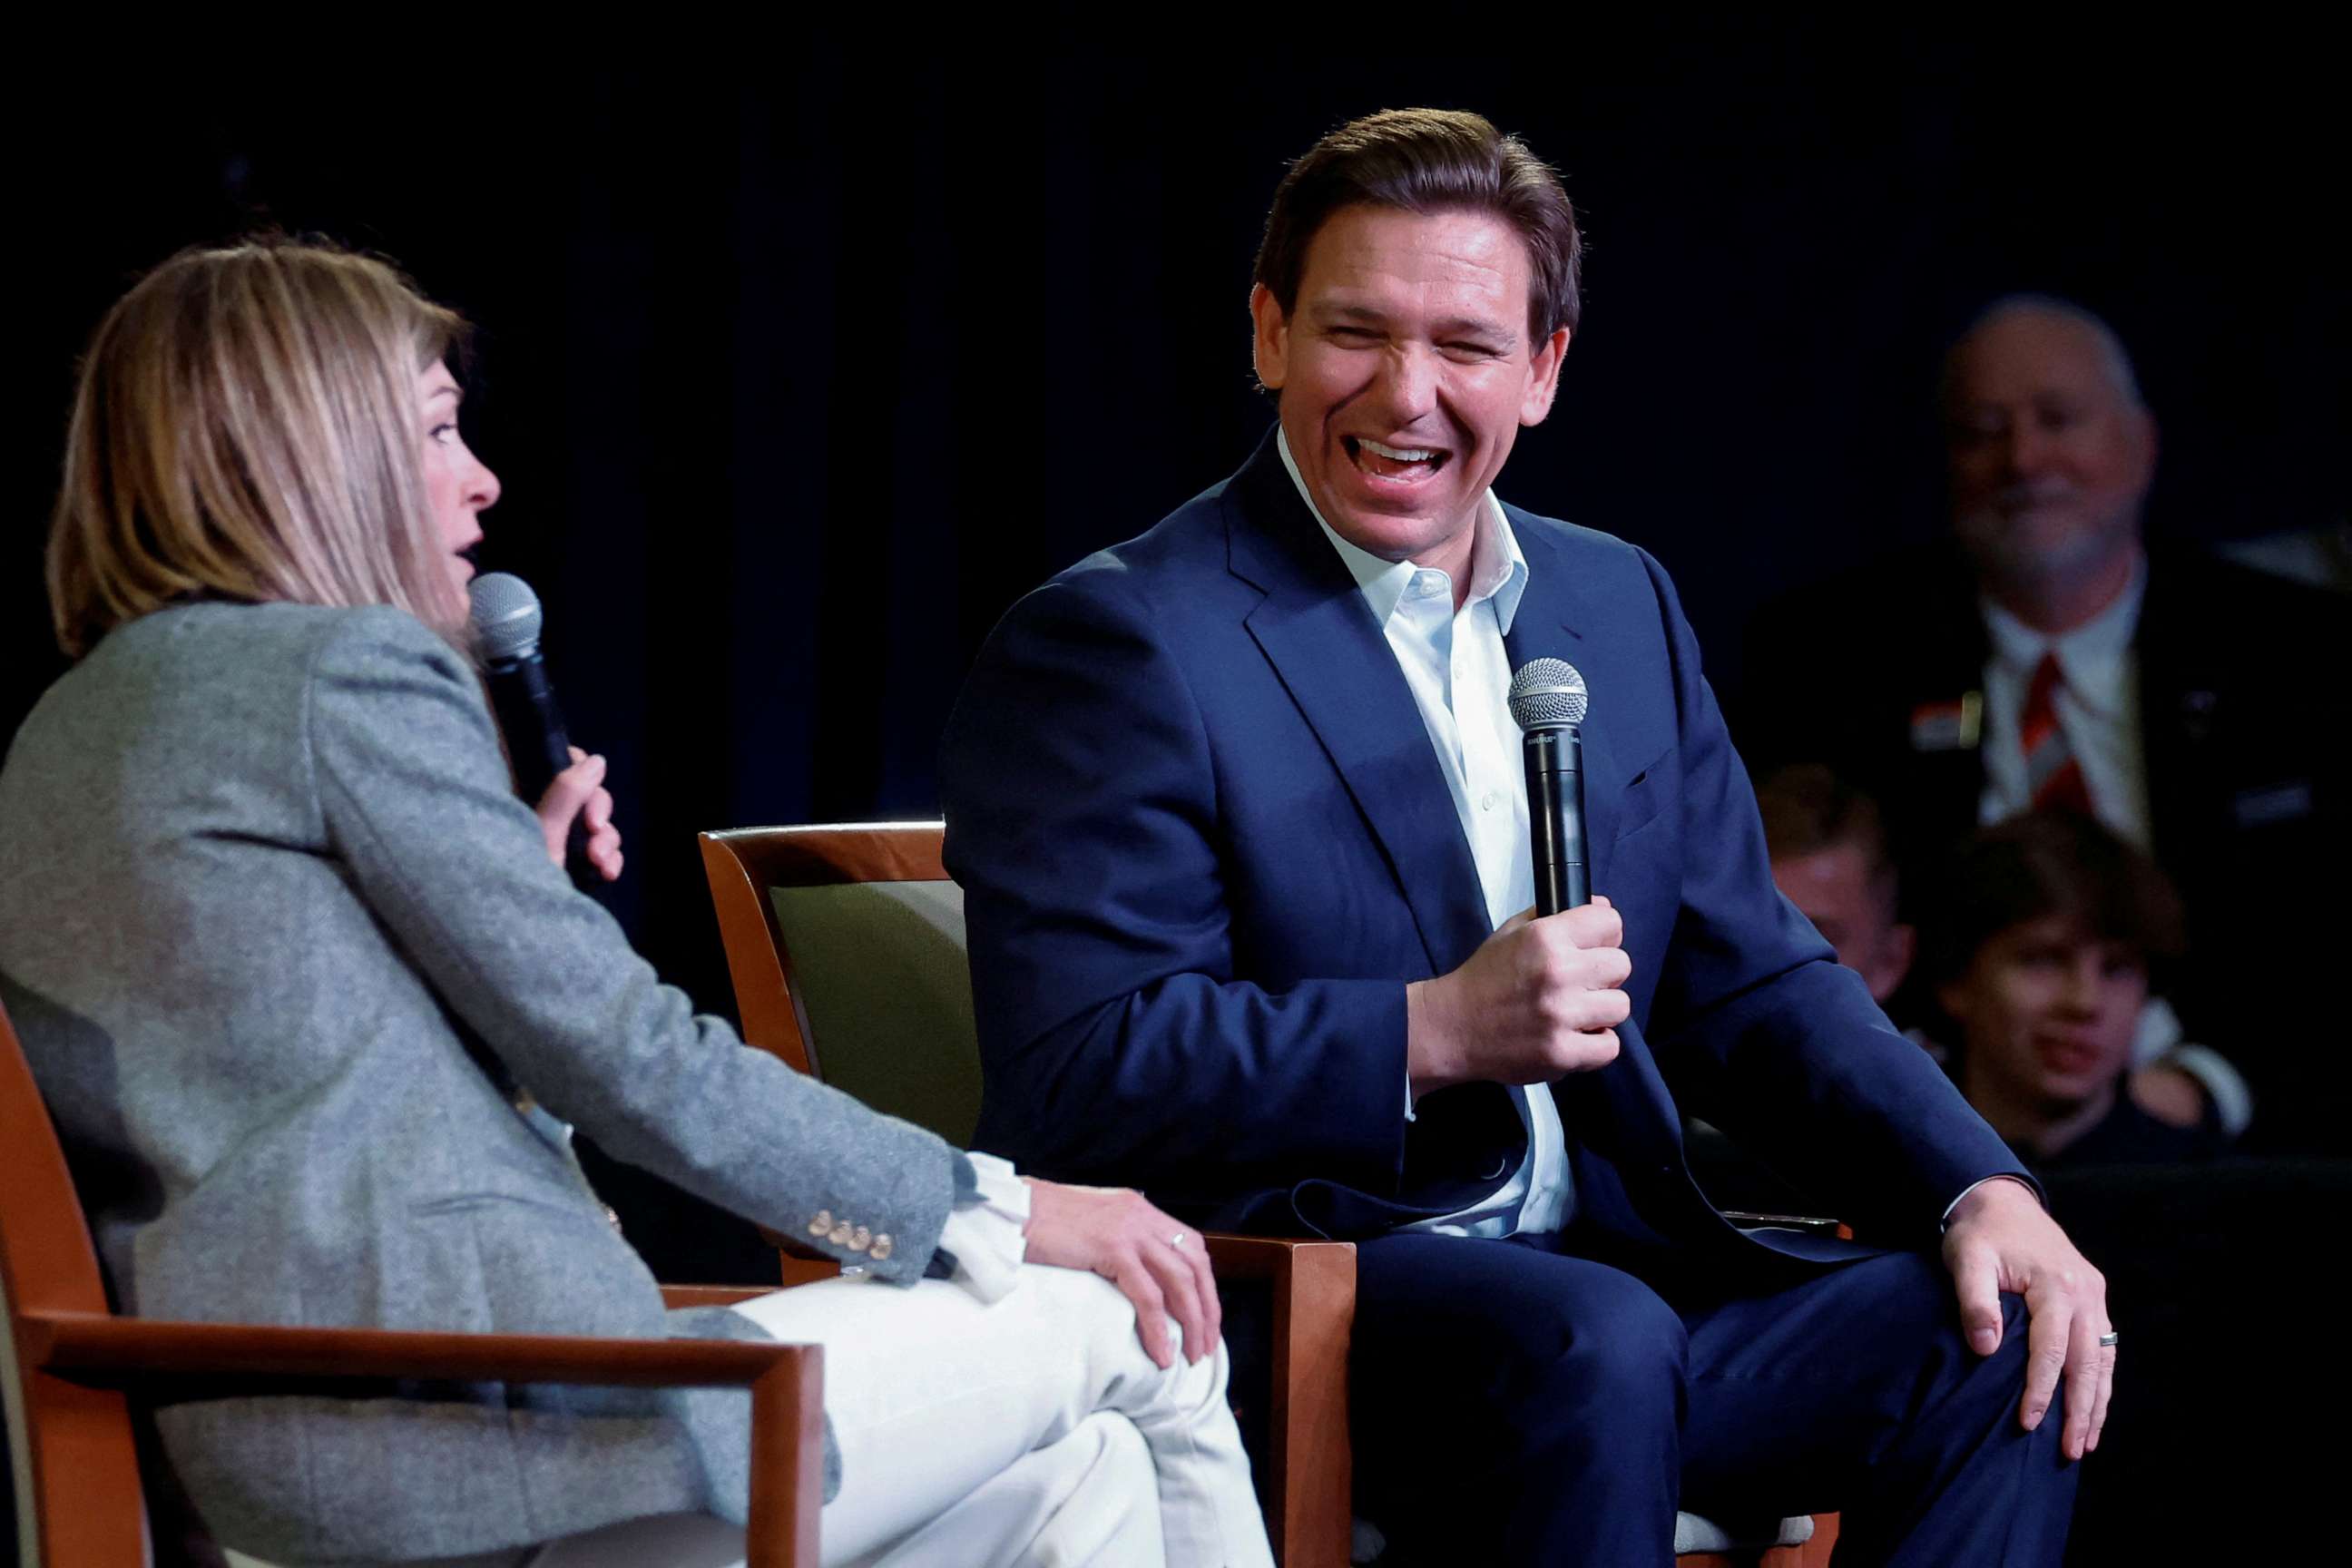 PHOTO: Florida Governor Ron DeSantis, with Iowa Governor Kim Reynolds, makes his first trip to the early voting state of Iowa on a book tour stop, in Davenport, Iowa, March 10, 2023.